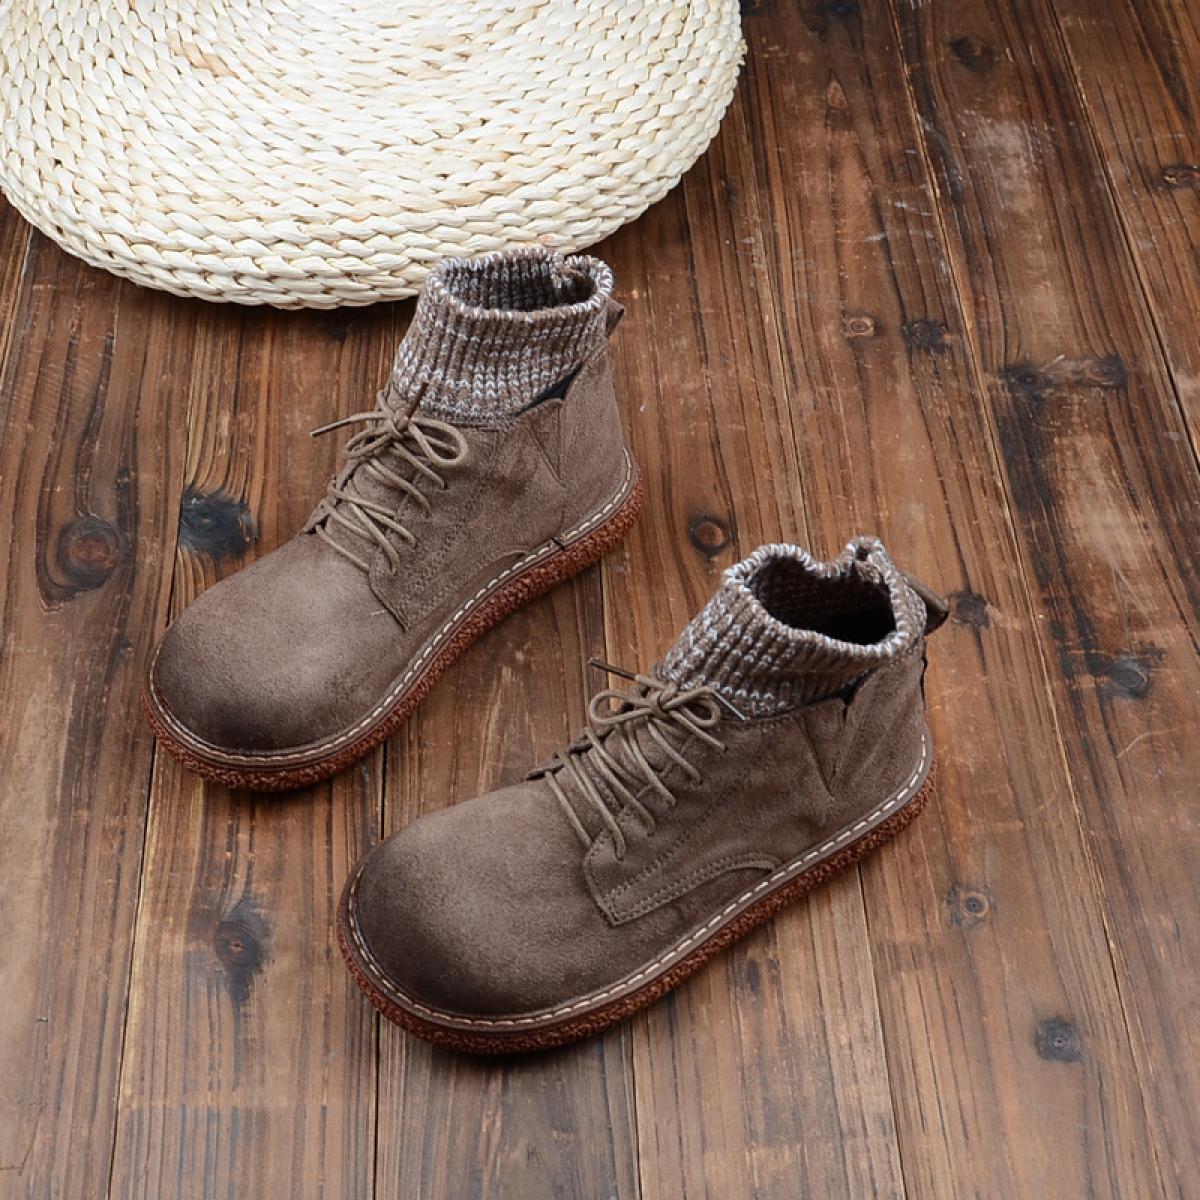 Mori Retro Wool Mouth Socks Canister Short Boots Casual Suede Thick Sole Big Head Women Boots Students Ankle Boots Women